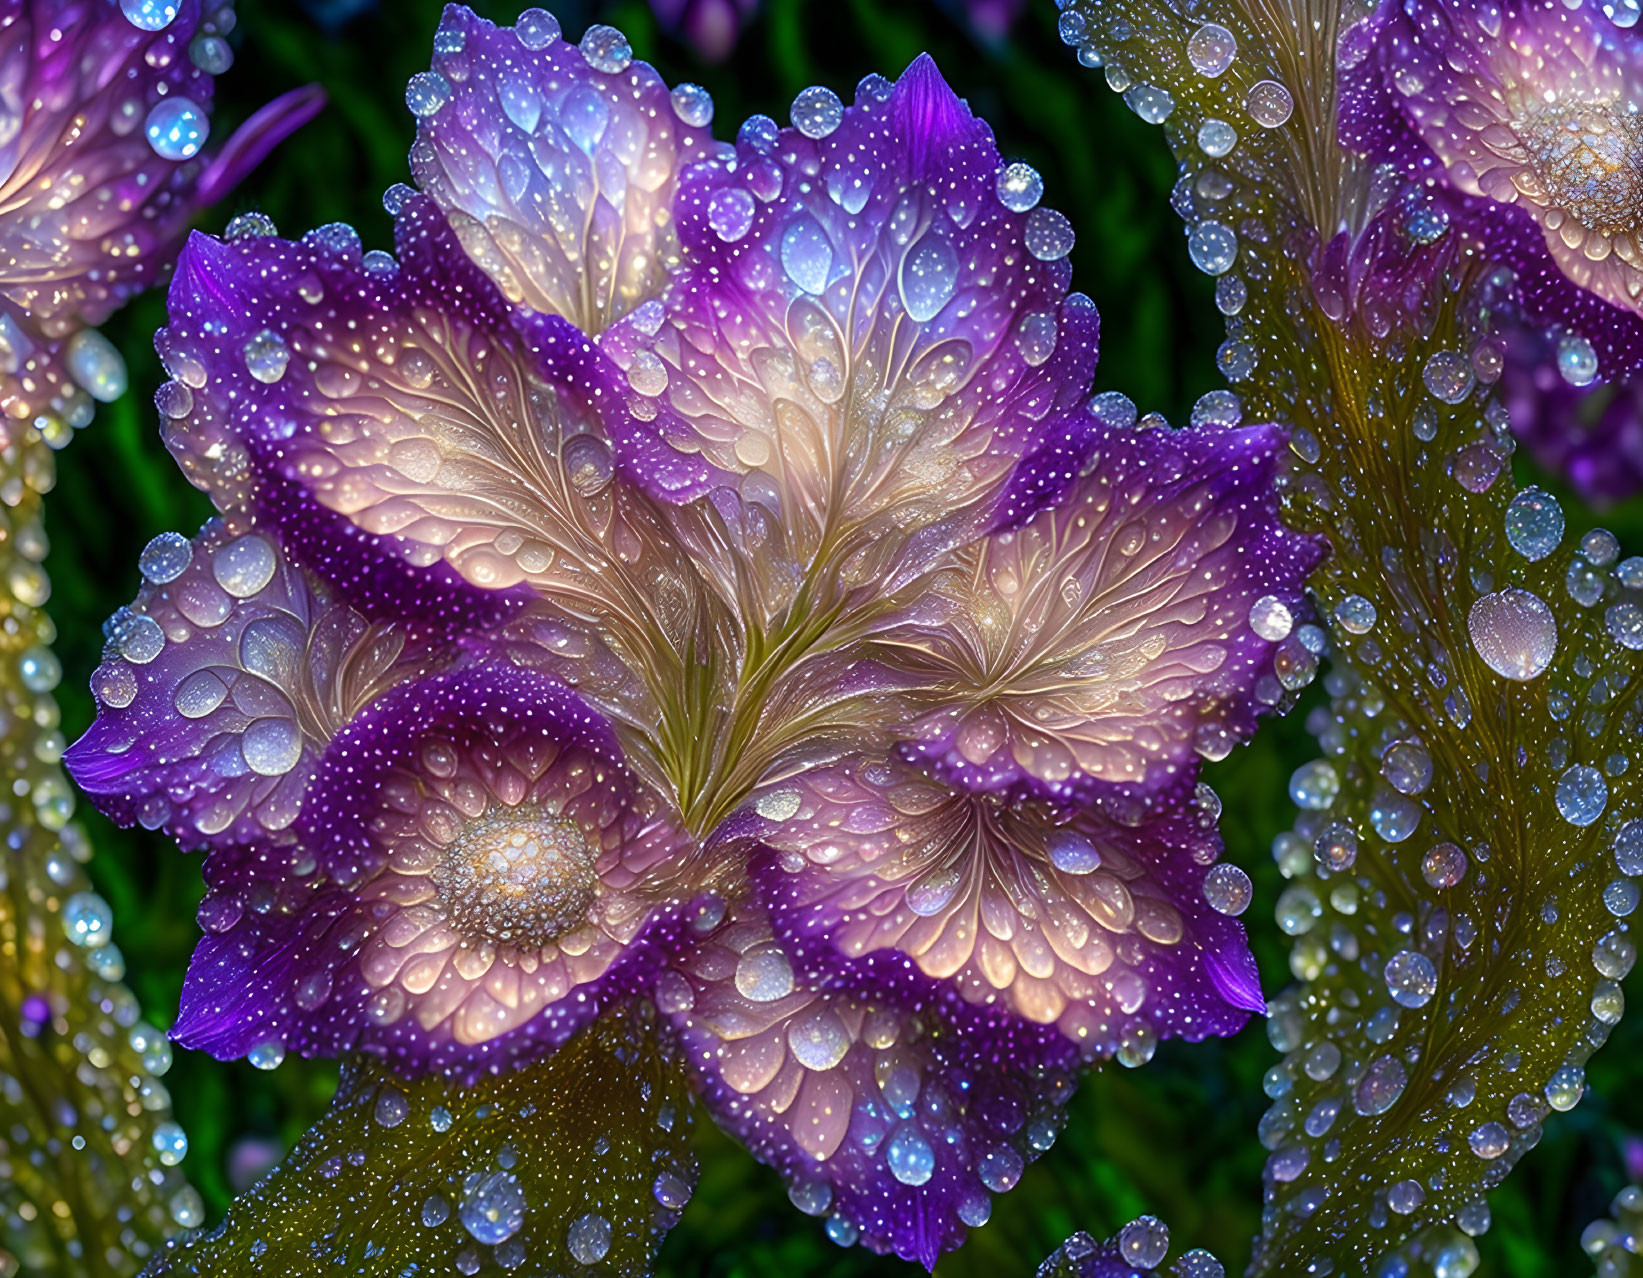 Vibrant Purple Flowers with Dewdrops on Dark Green Foliage